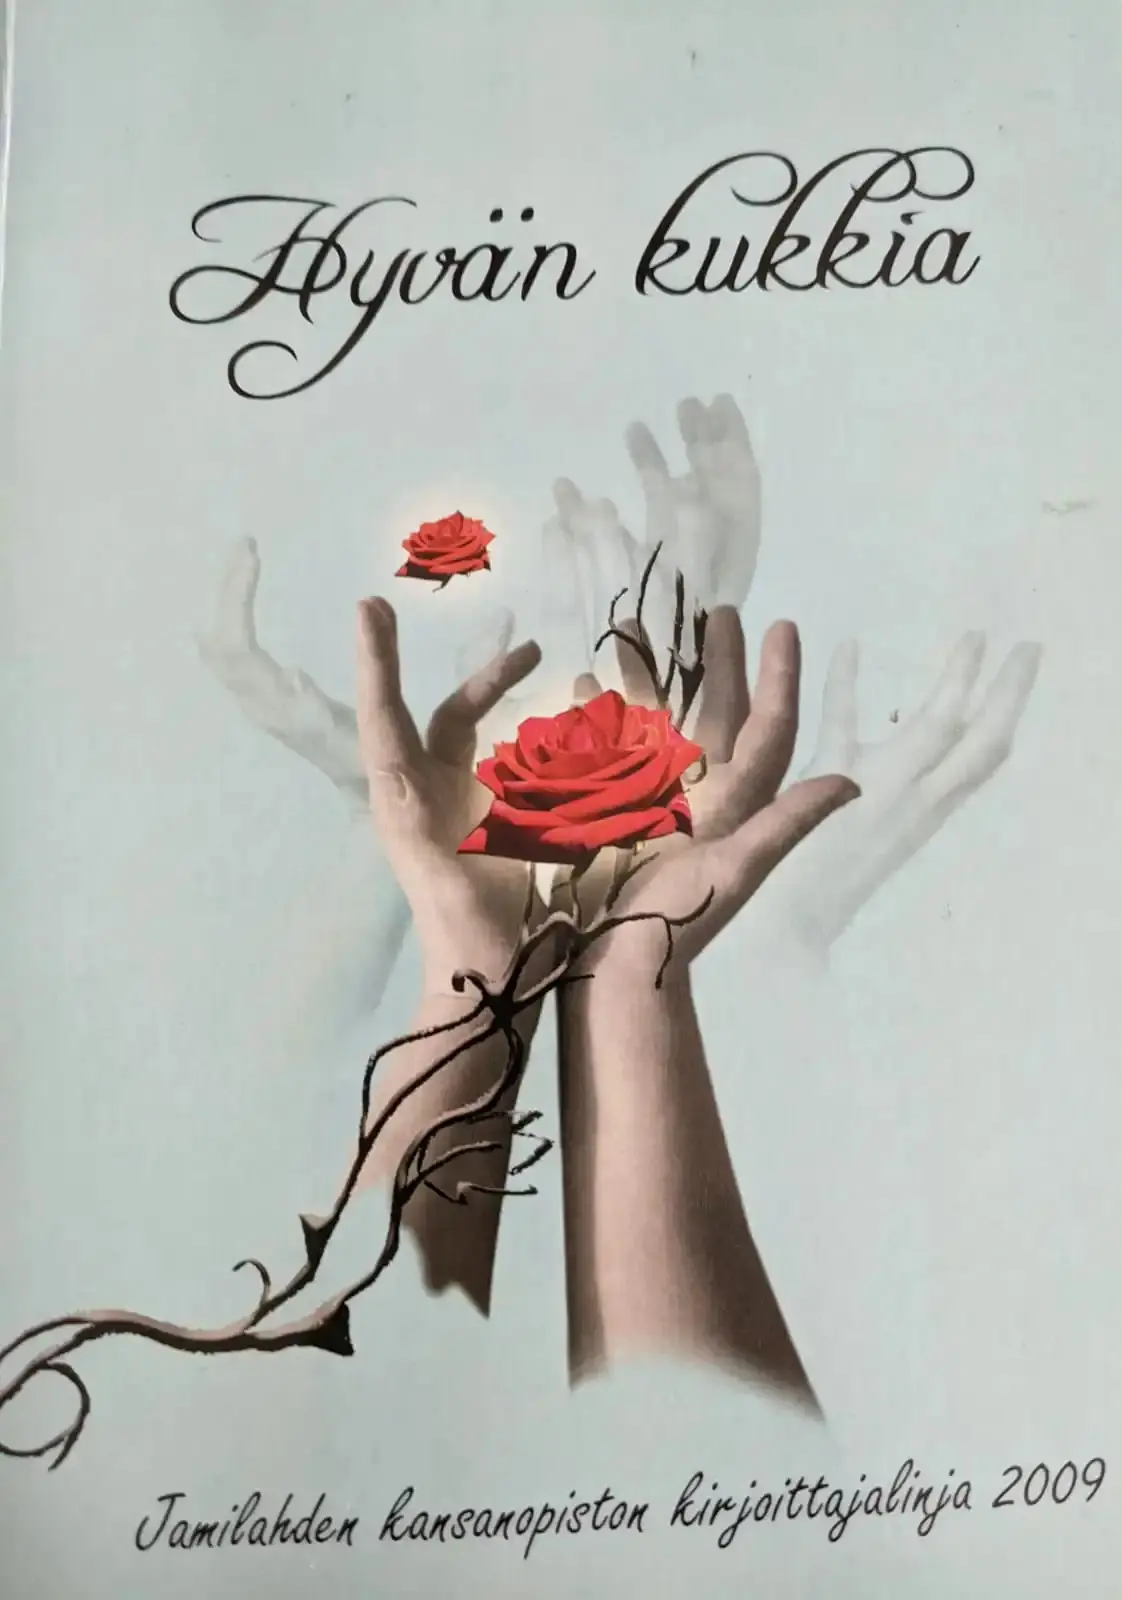 Book's cover